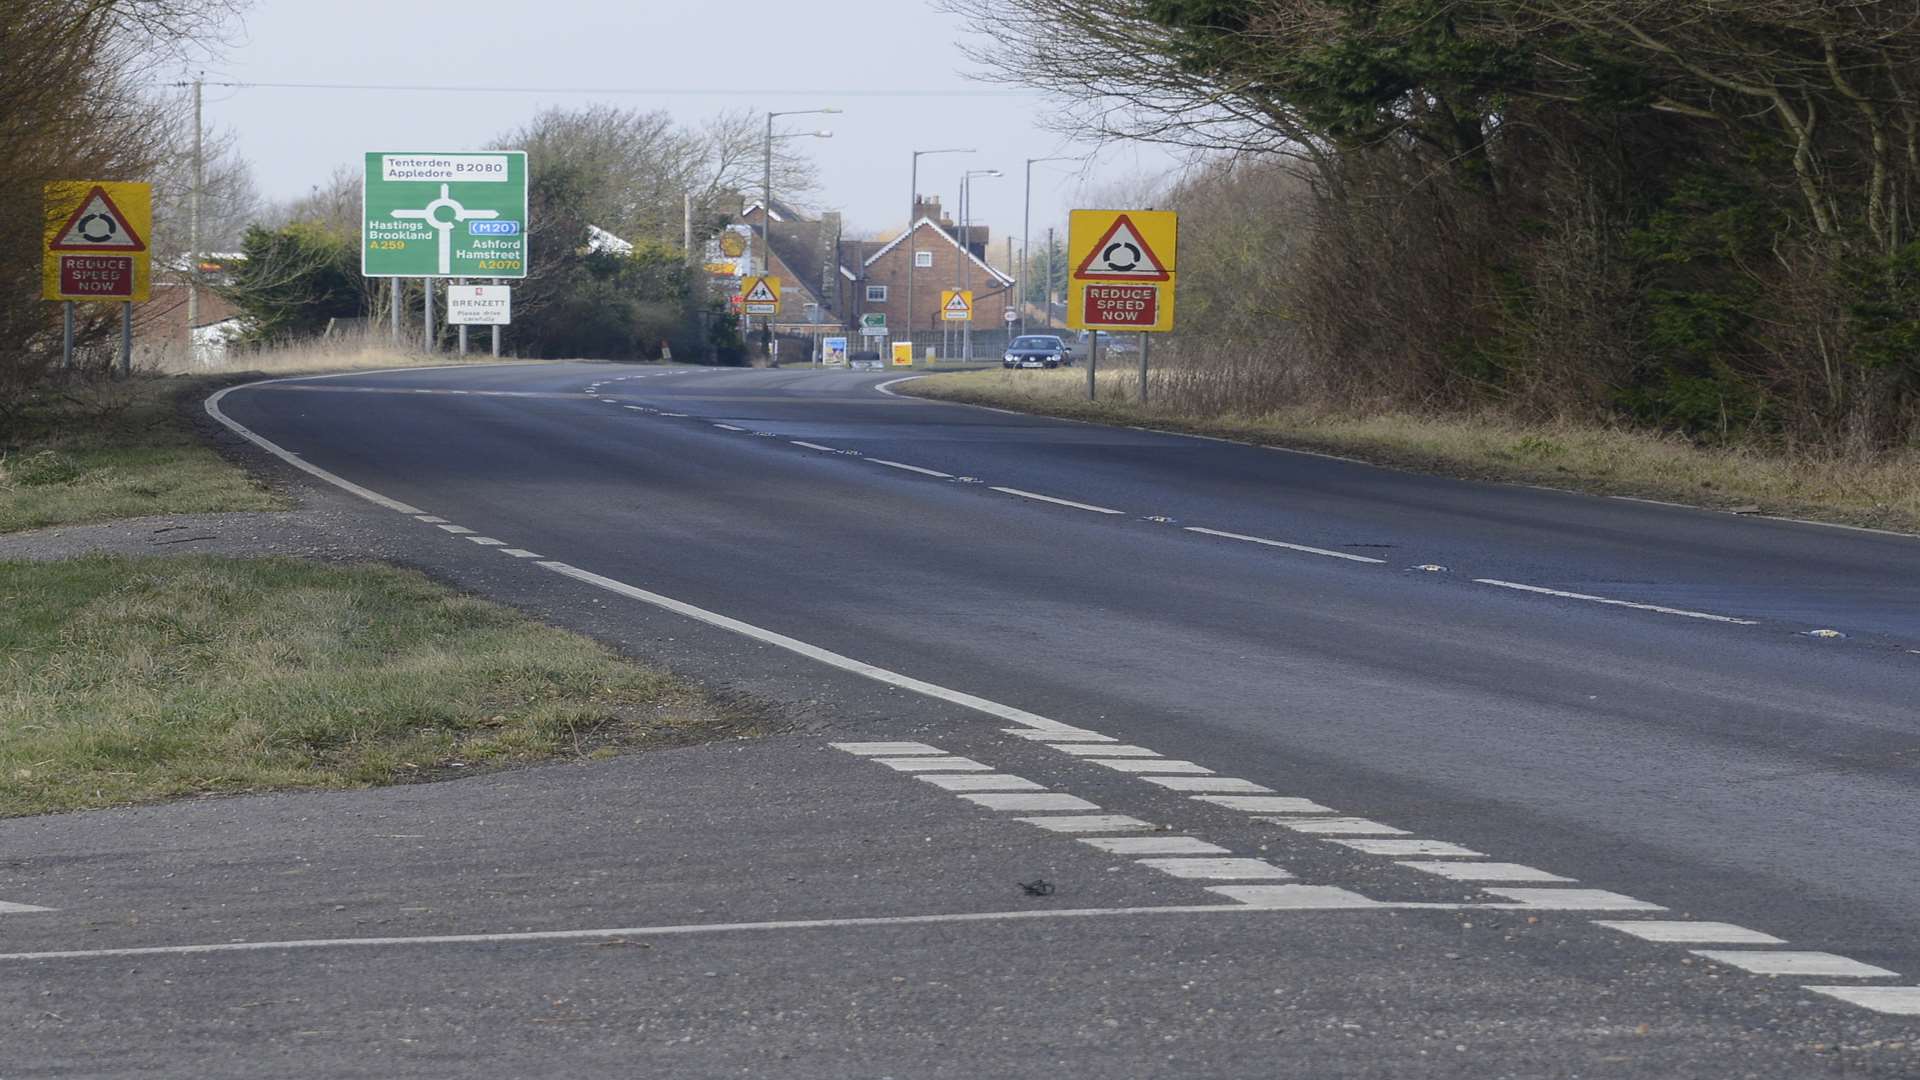 The area of the death crash, the A259 and Tickner's Lane junction near Brenzett